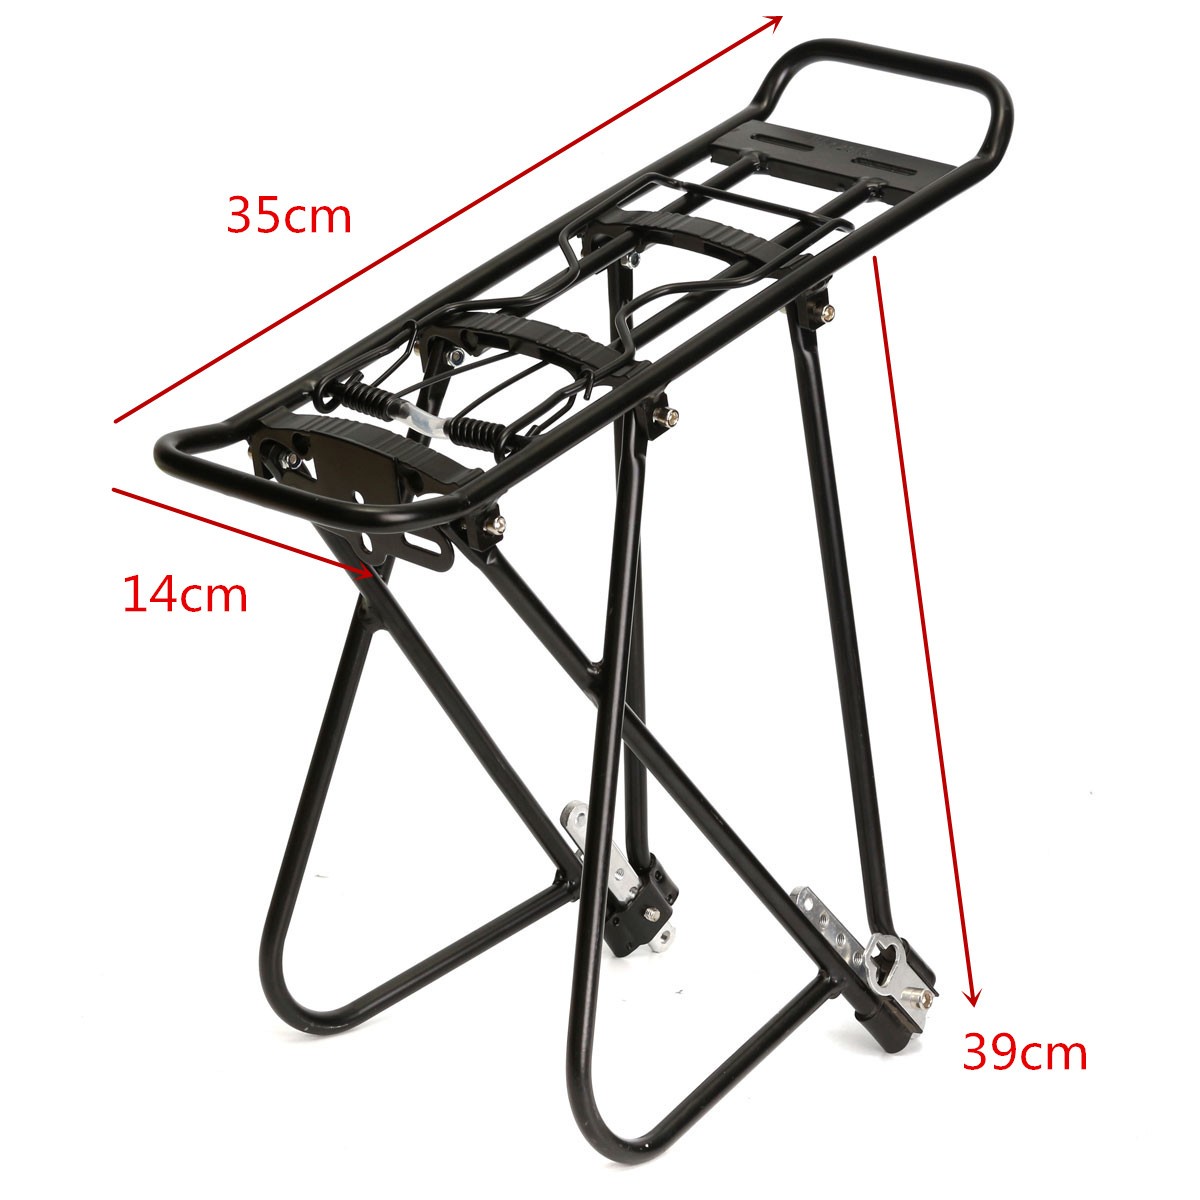 Details about   LUGGAGE RACK ALUMINUM ALLOY BICYCLE LUGGAGE SHELF CARRIER PACKAGING BAGS 